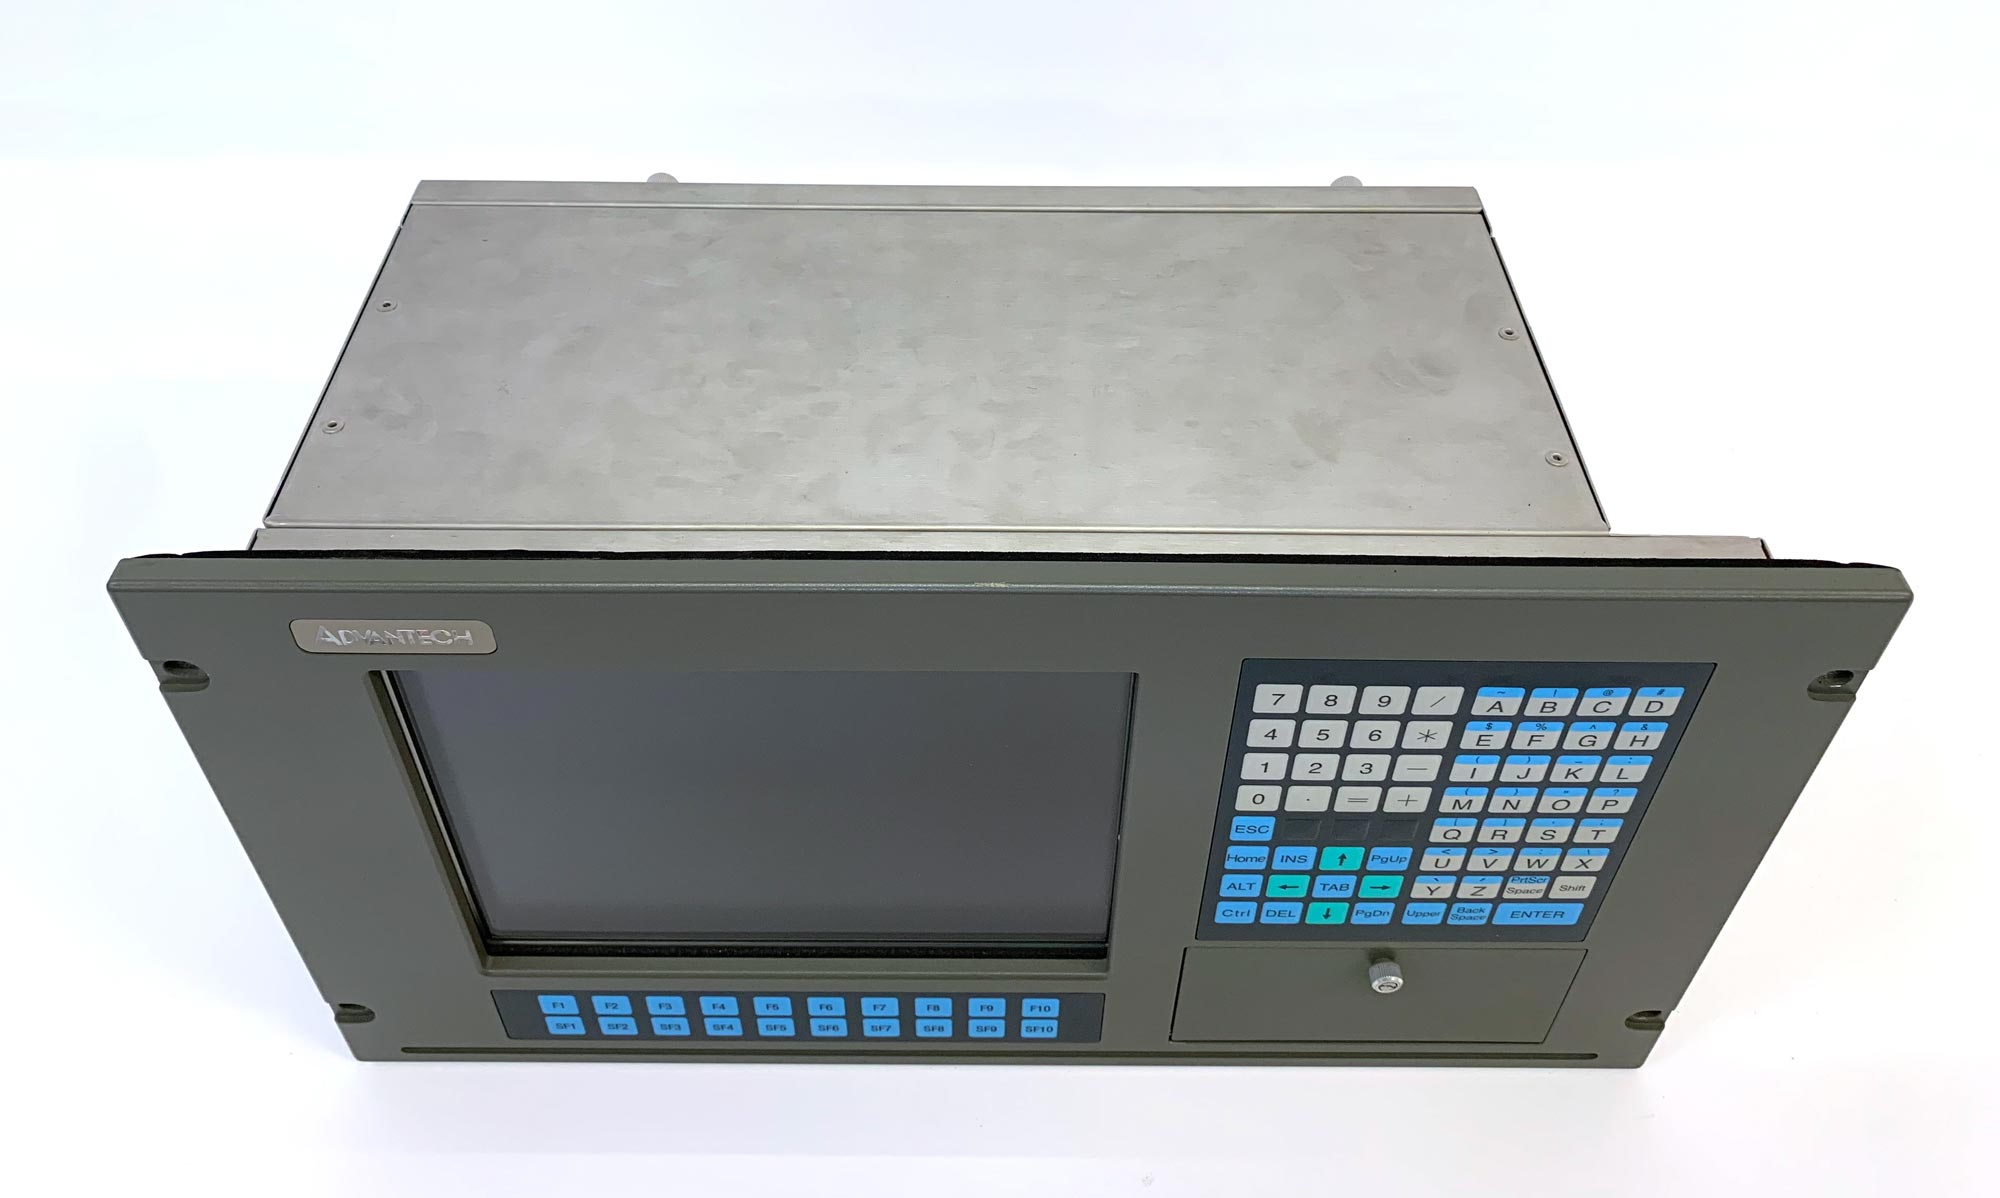 AWS-843 - Industrie Workstation mit 10,4" LCD Display